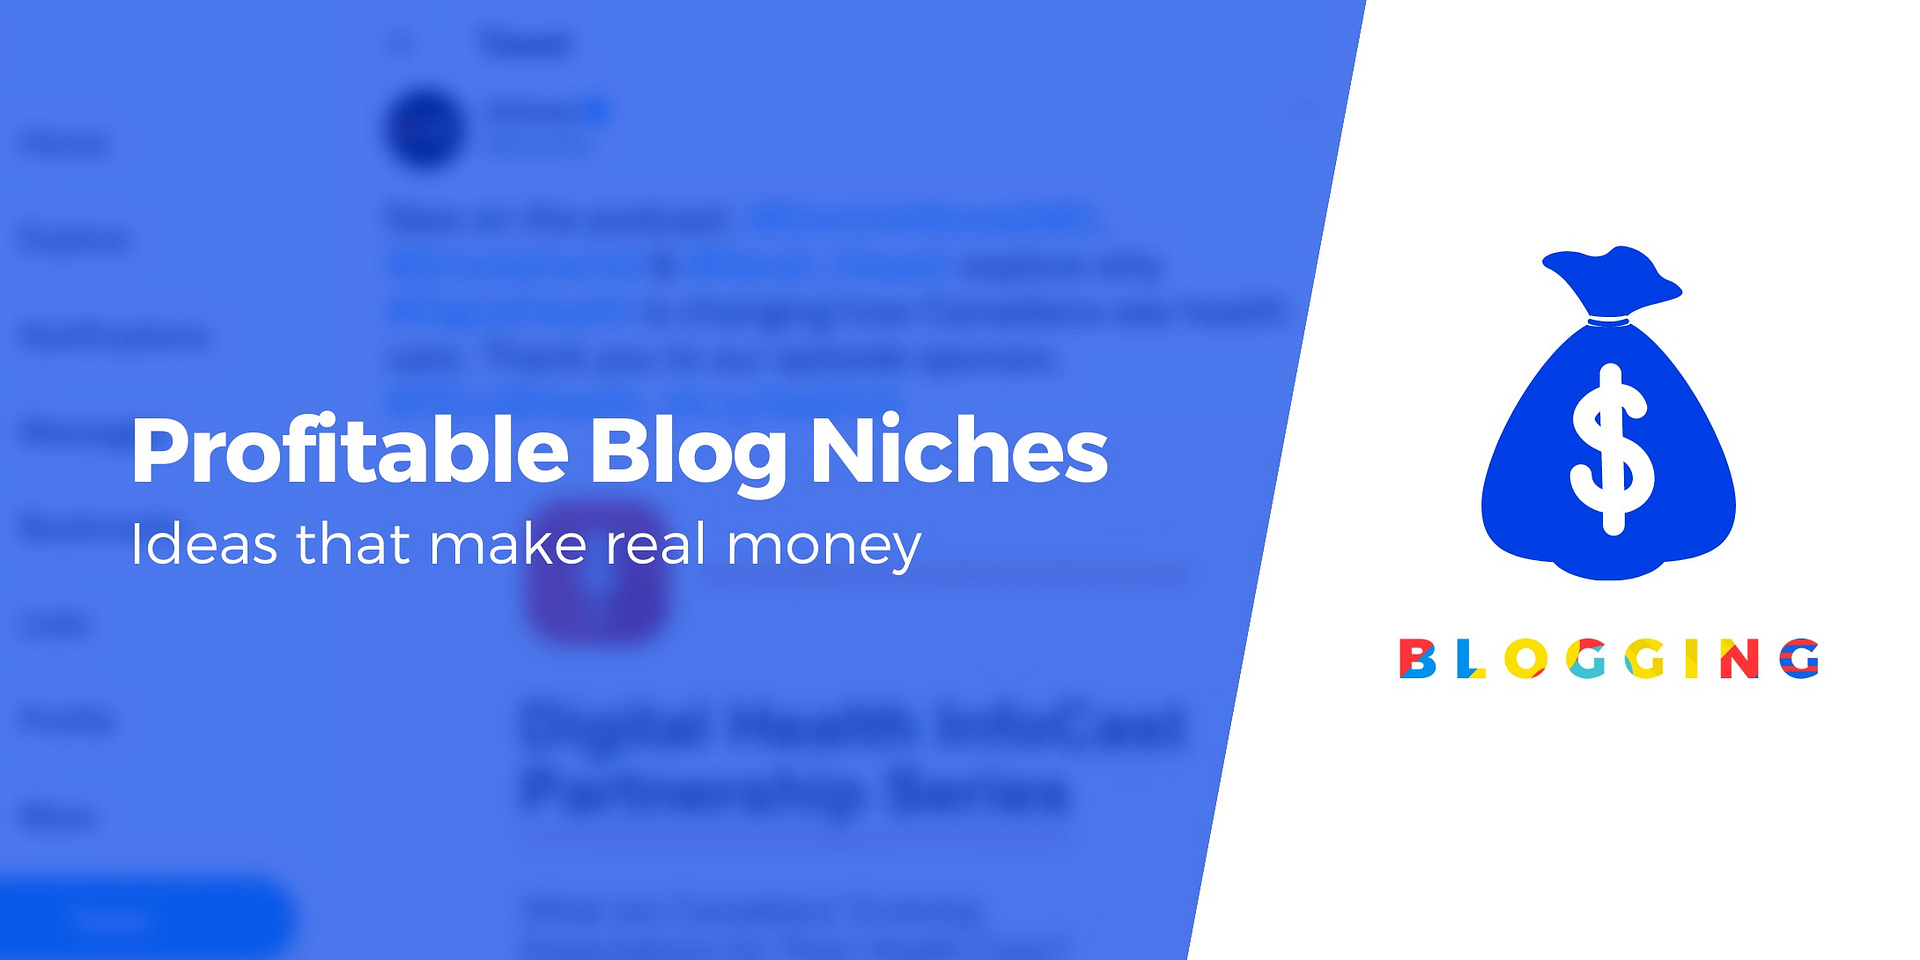 10 Most Profitable  Niches  Highest RPM, CPM Rates by Niche 